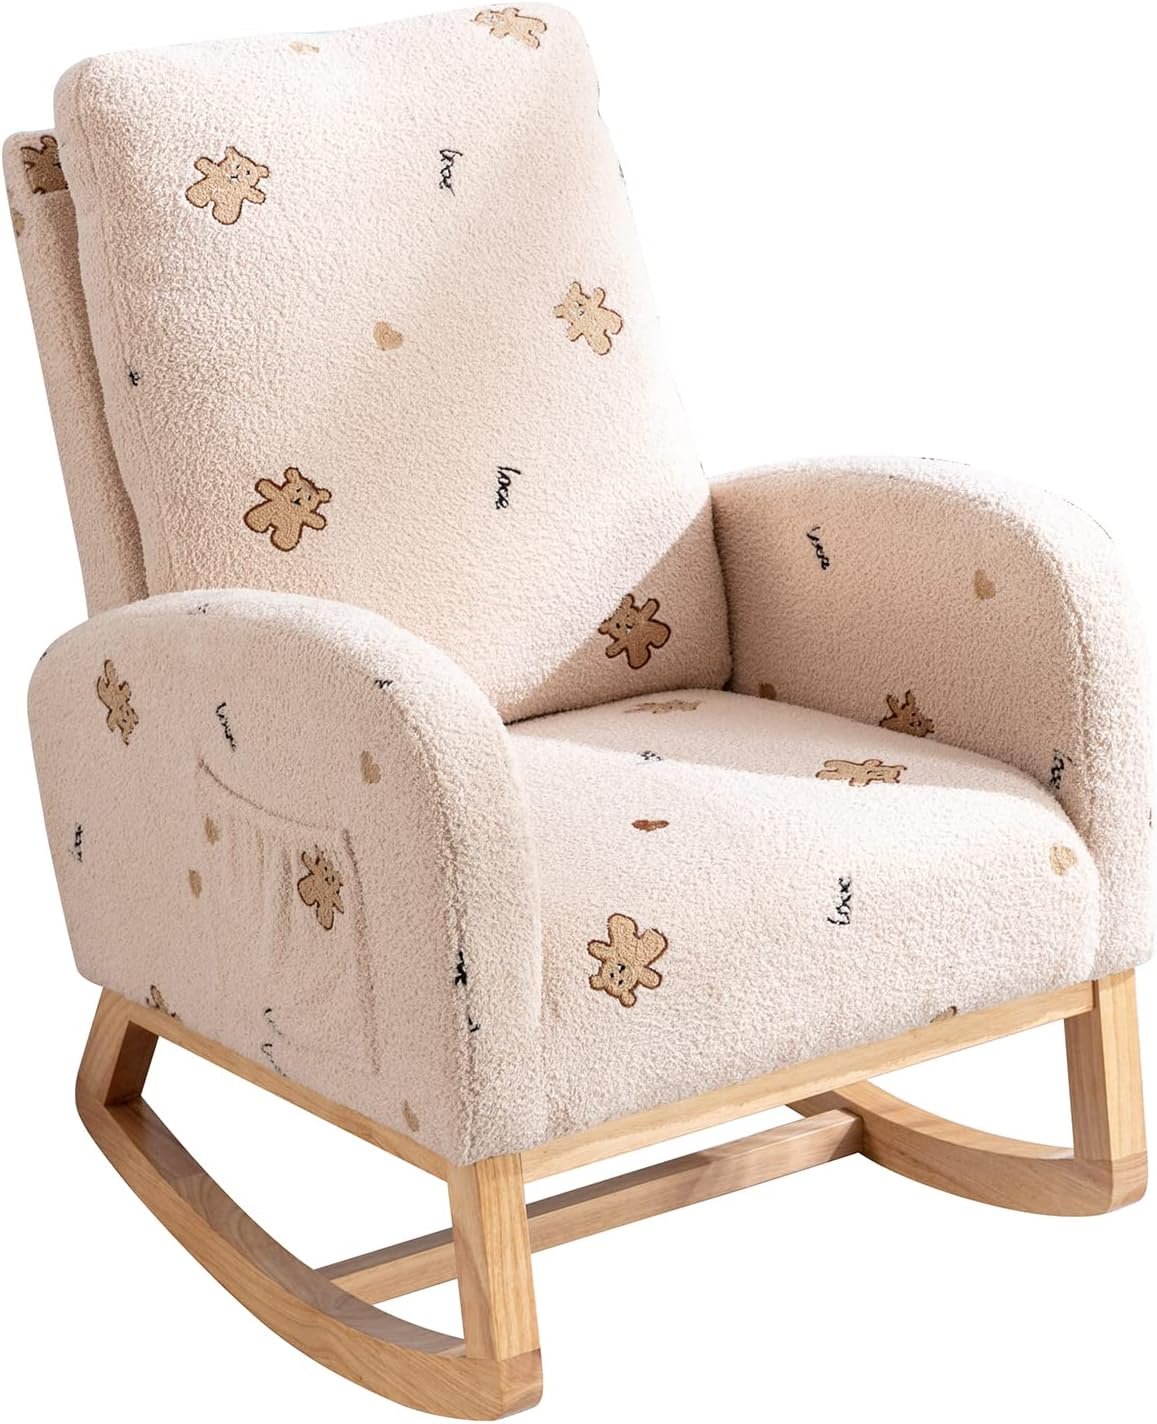 Modern Rocking Chair for Nursery, Mid Century Accent Rocker Armchair with Side Pocket, Upholstered High Back Wooden Rocking Chair for Living Room Baby Kids Room Bedroom, Beige Boucle